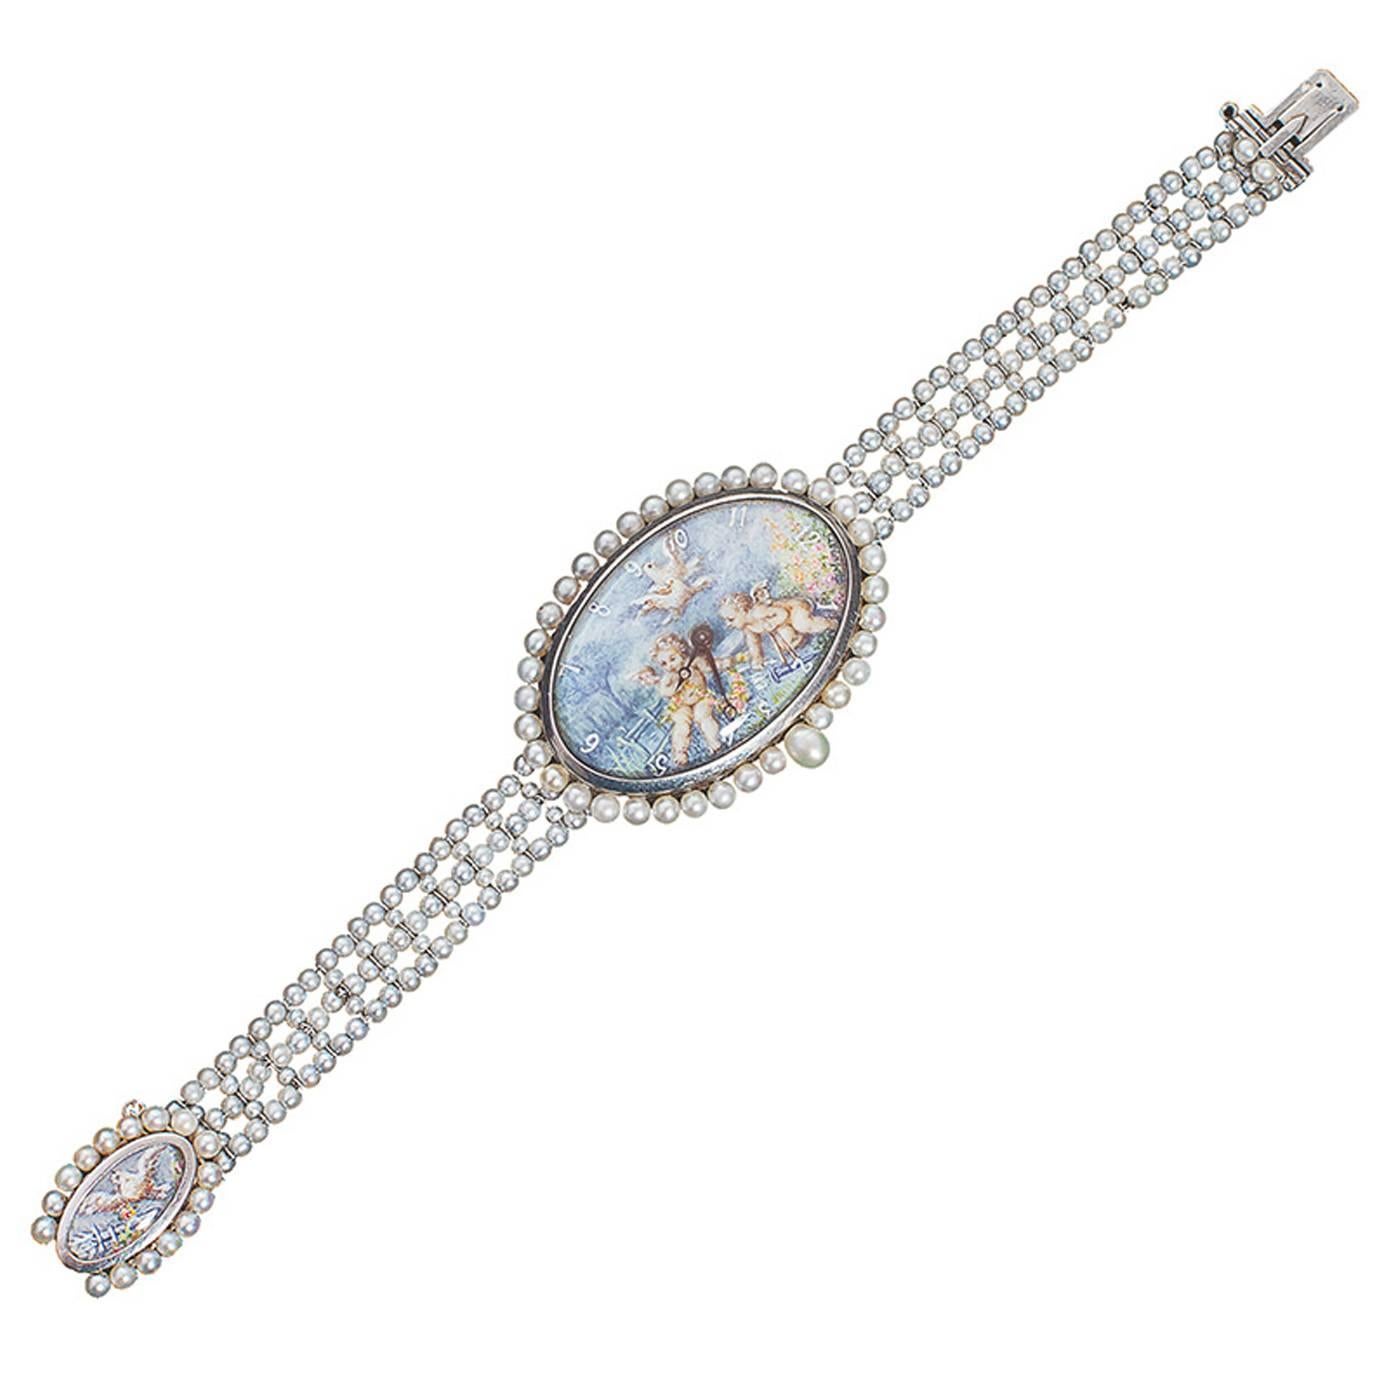 Phenomenal one of a kind French wristwatch centering a painted watch face of cherubs and doves in a lovely garden scene surrounded by natural pearls with a natural pearl winding stem. The clasp mirrors the face with a painted dove and a flower